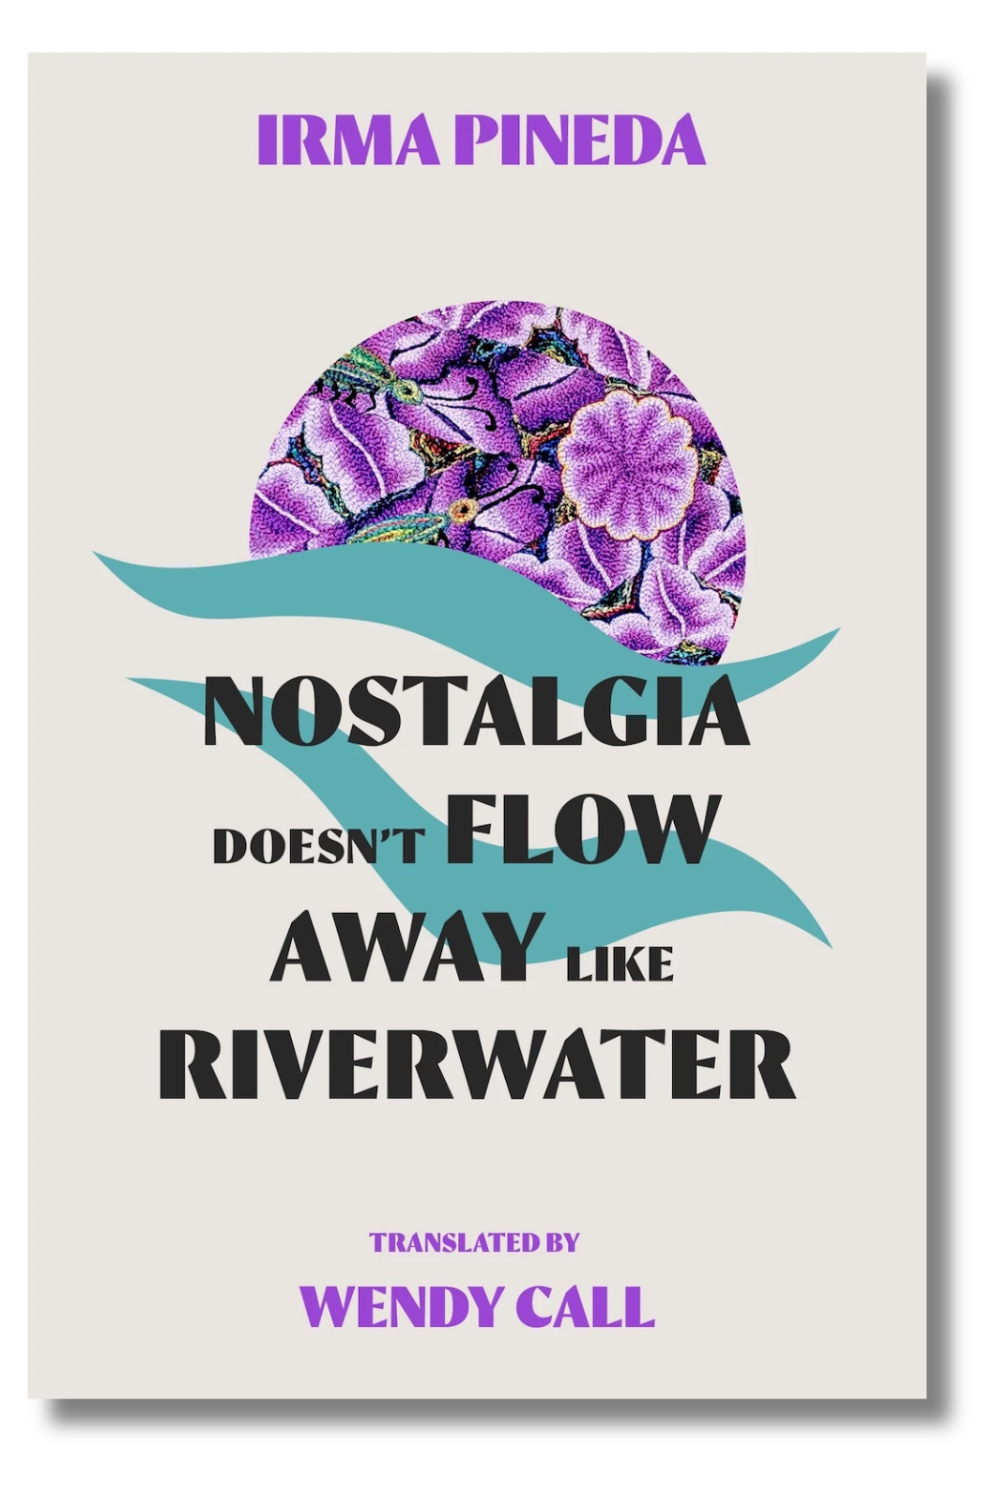 The cover of Irma Pineda's "Nostalgia Doesn't Flow Away Like Riverwater," tr. by Wendy Call